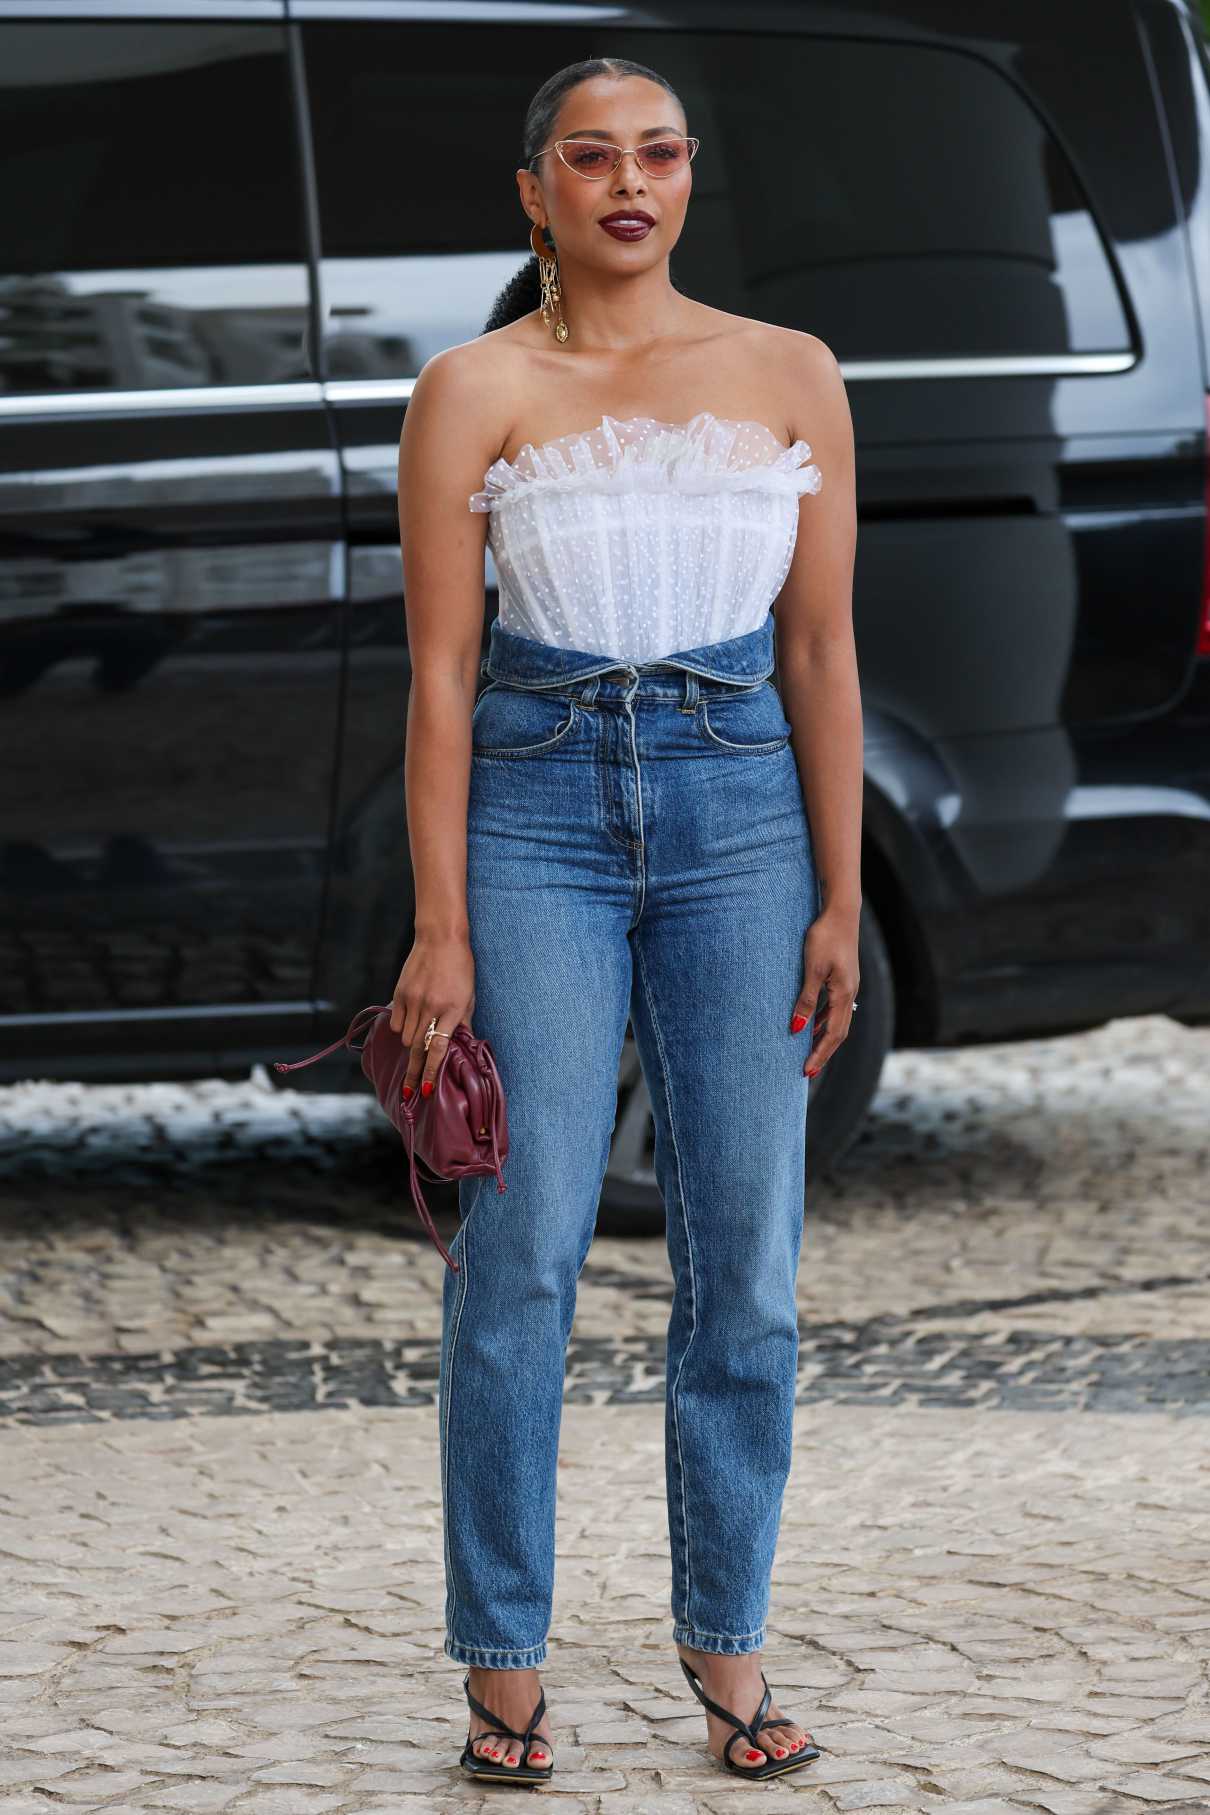 Kat Graham in a White Top